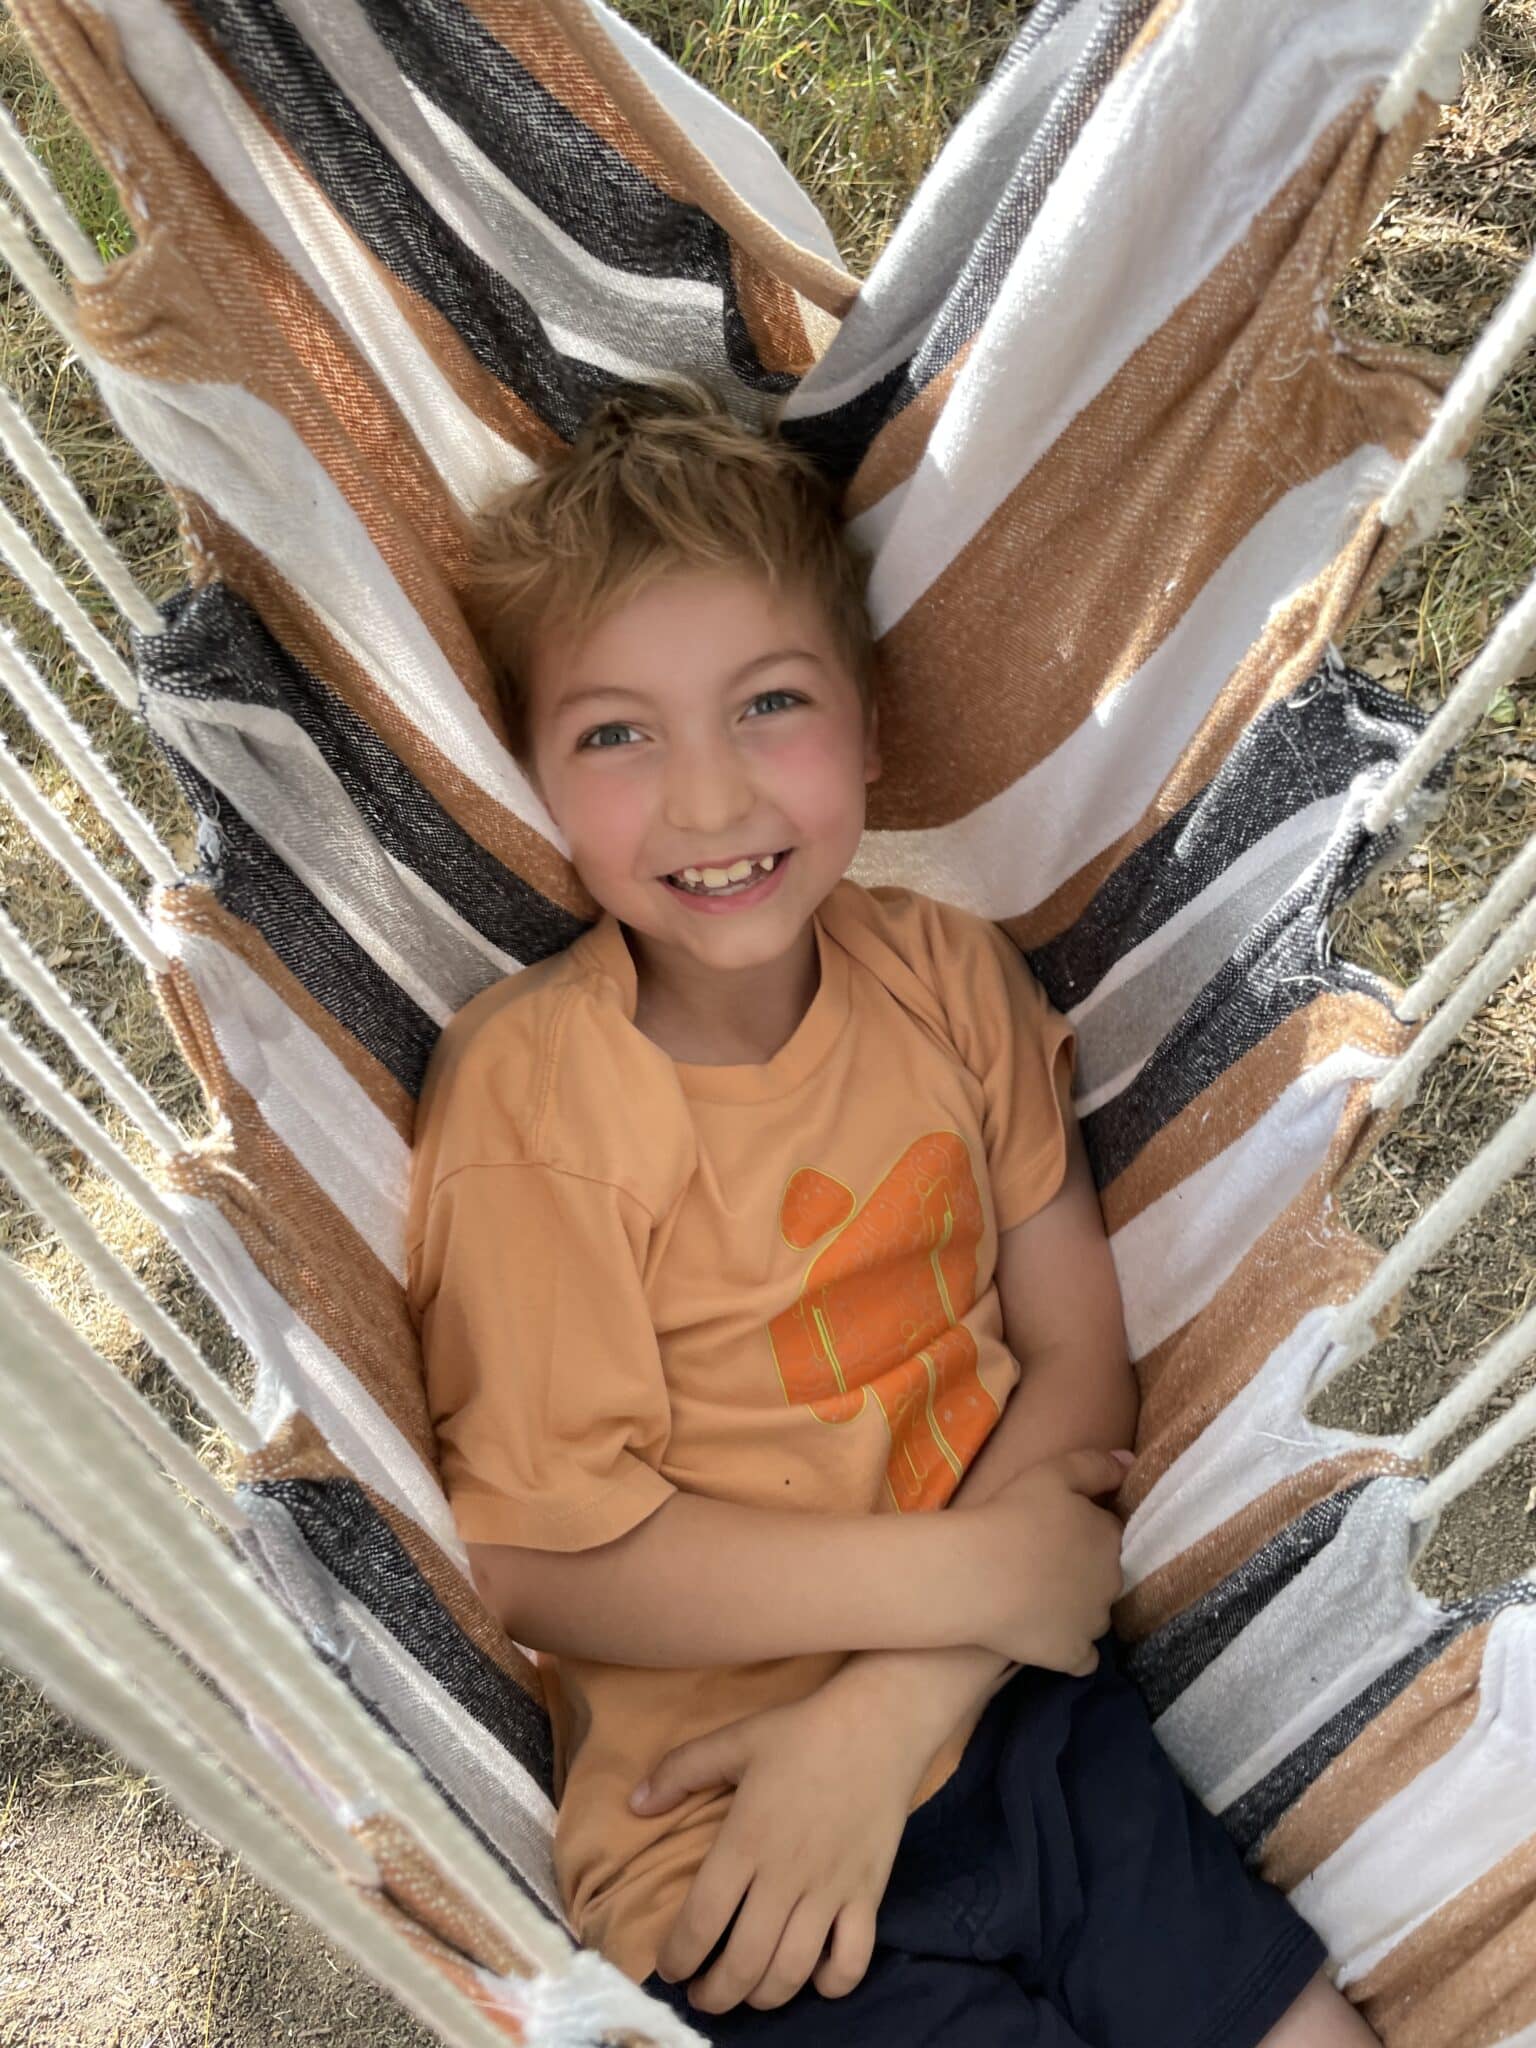 A young boy in an orange t-shirt lies in a hammock and smiles at the camera